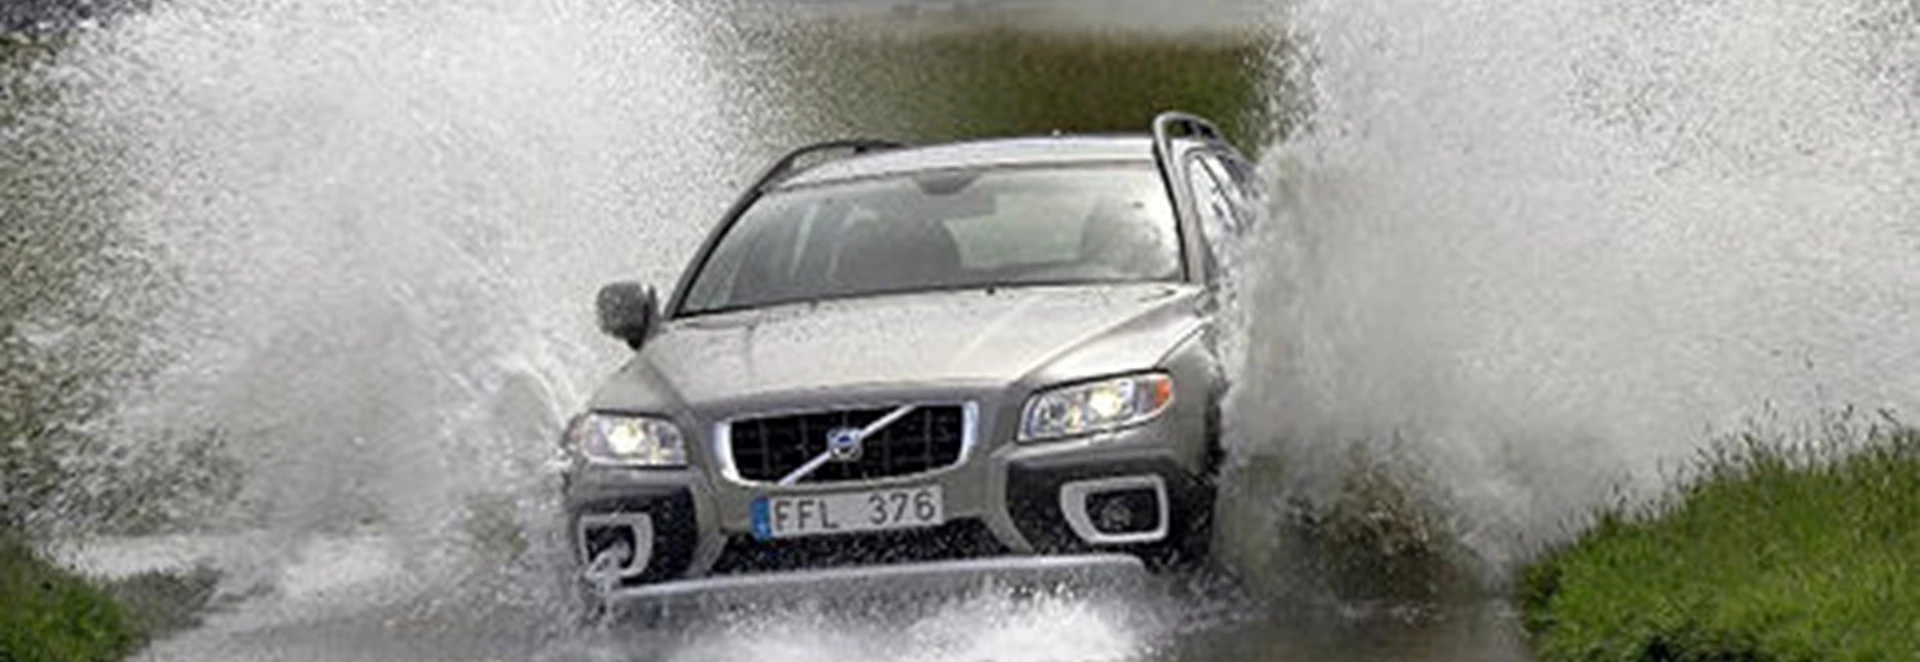 Volvo XC70 D5 SE Geartronic (2007) 